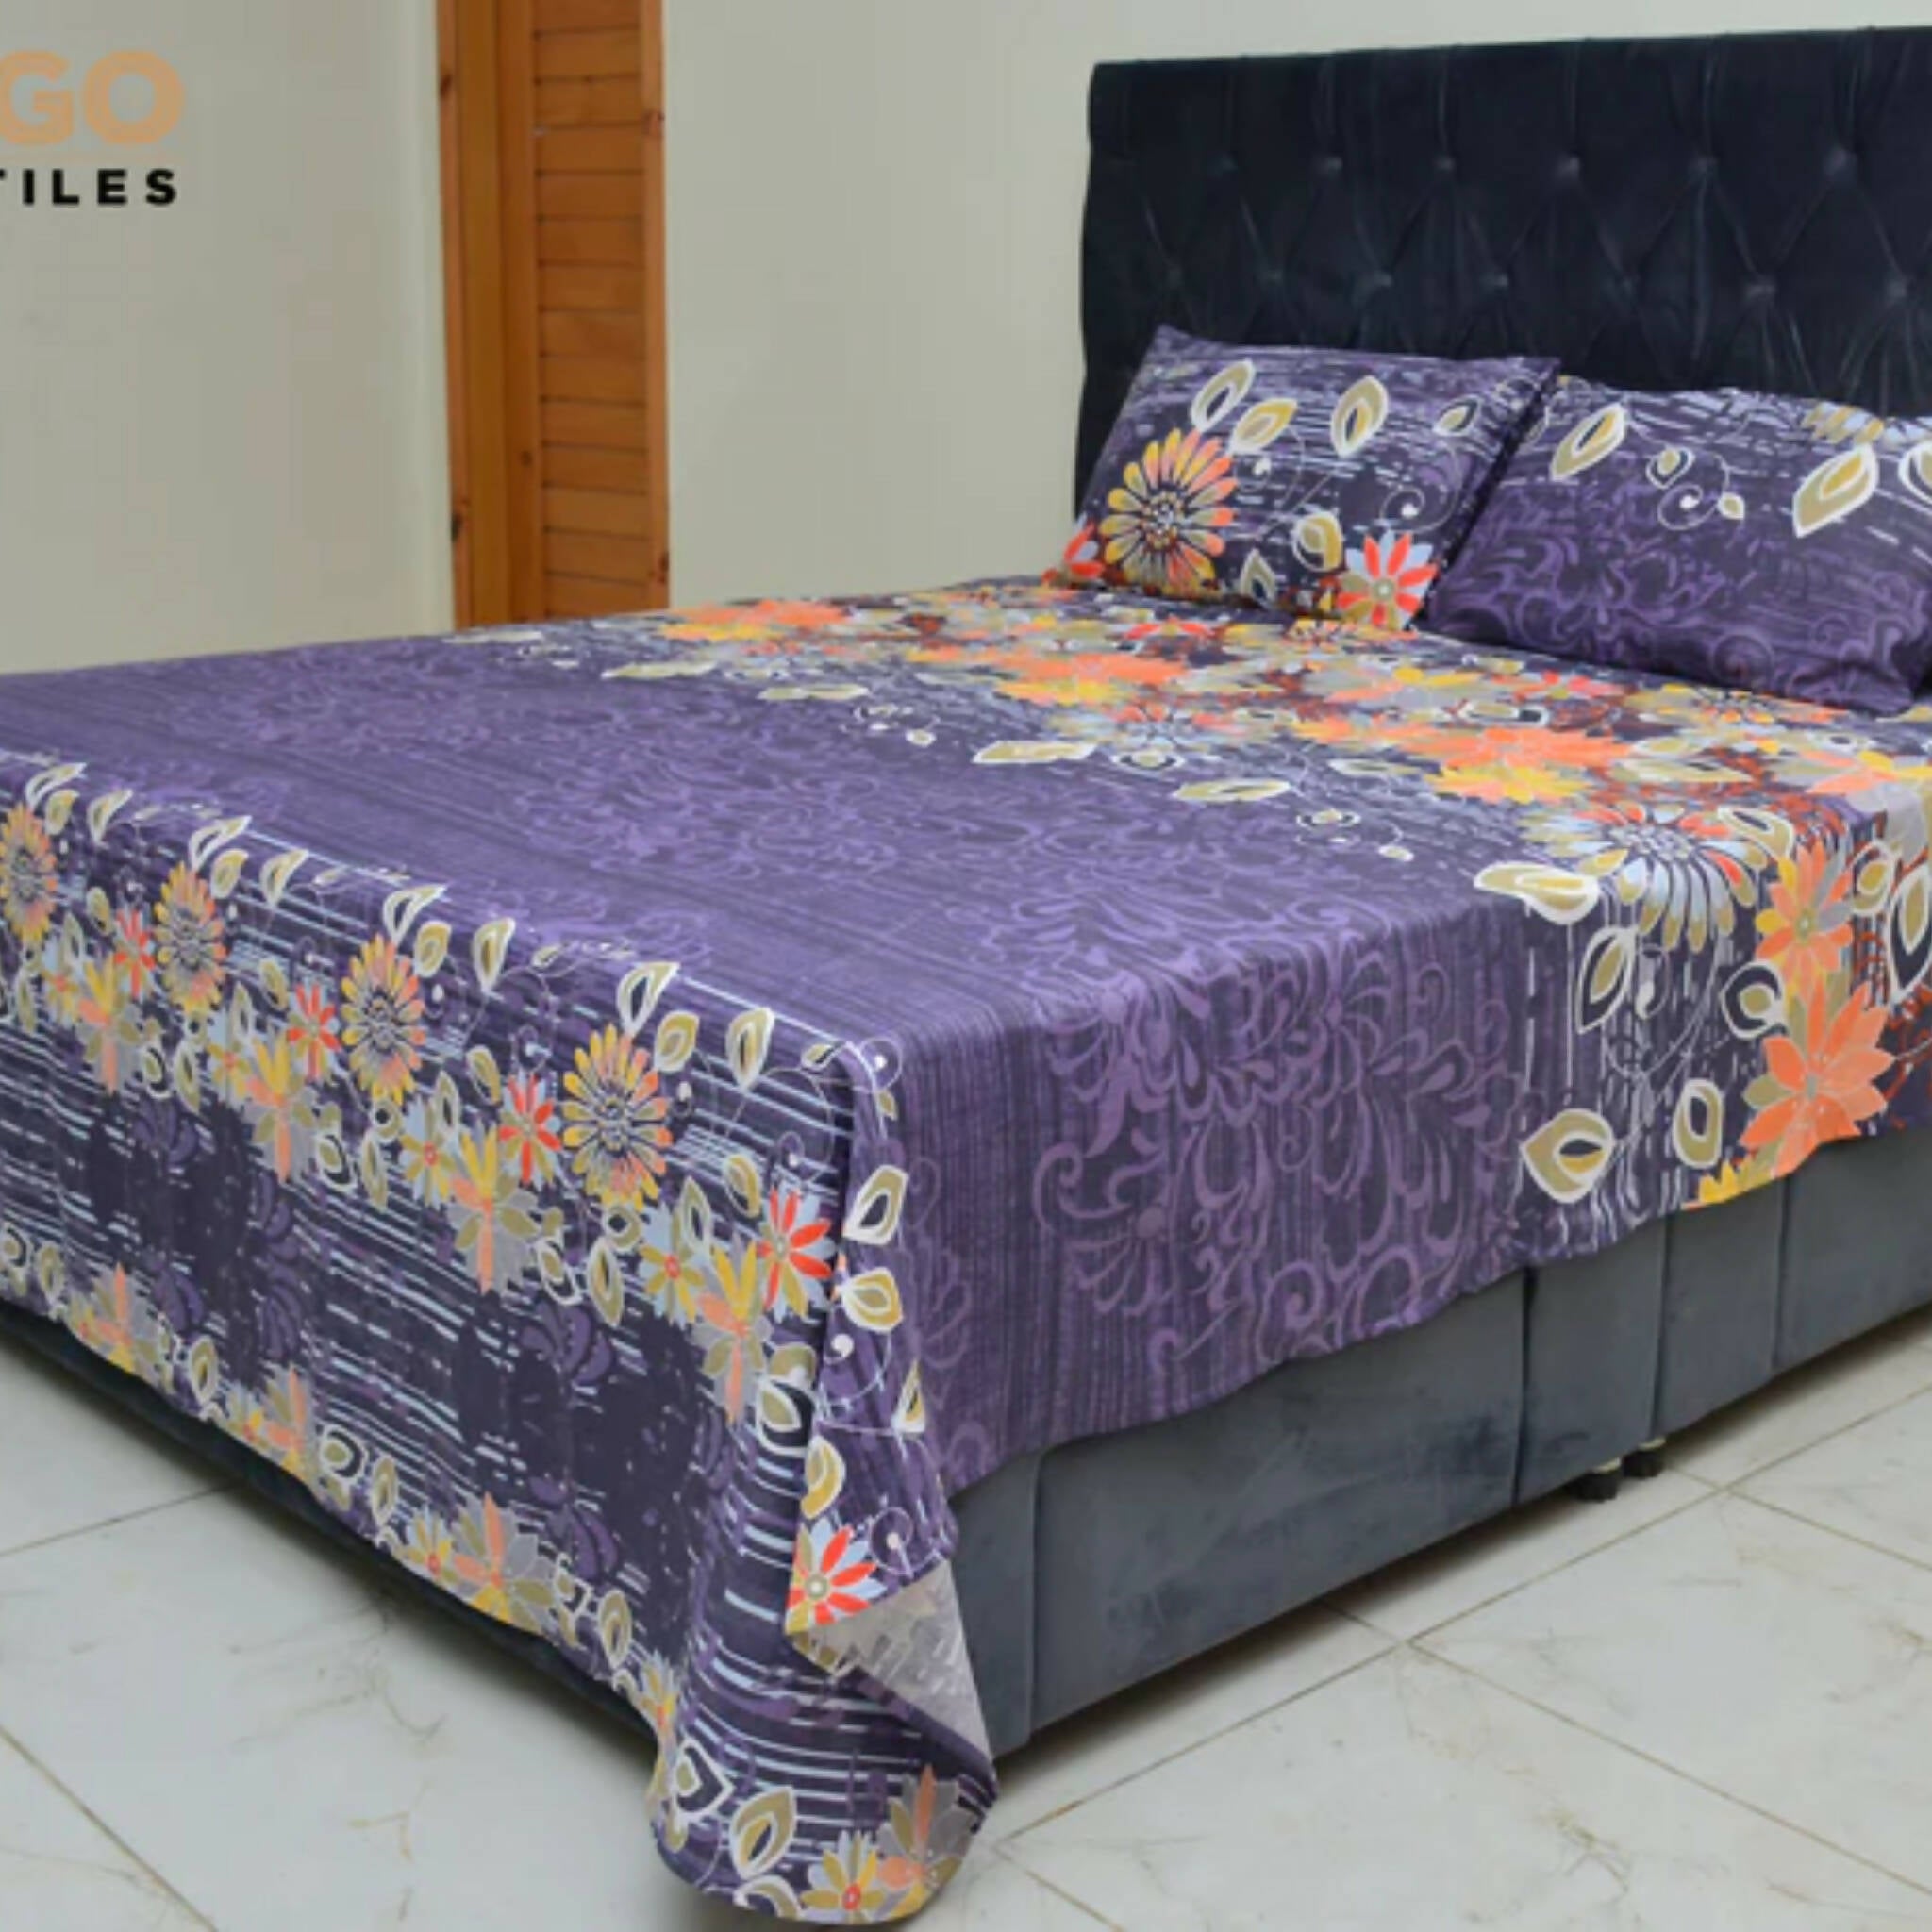 Bed Sheets, Elevate Your Bedroom with T-200 Lotus Garden